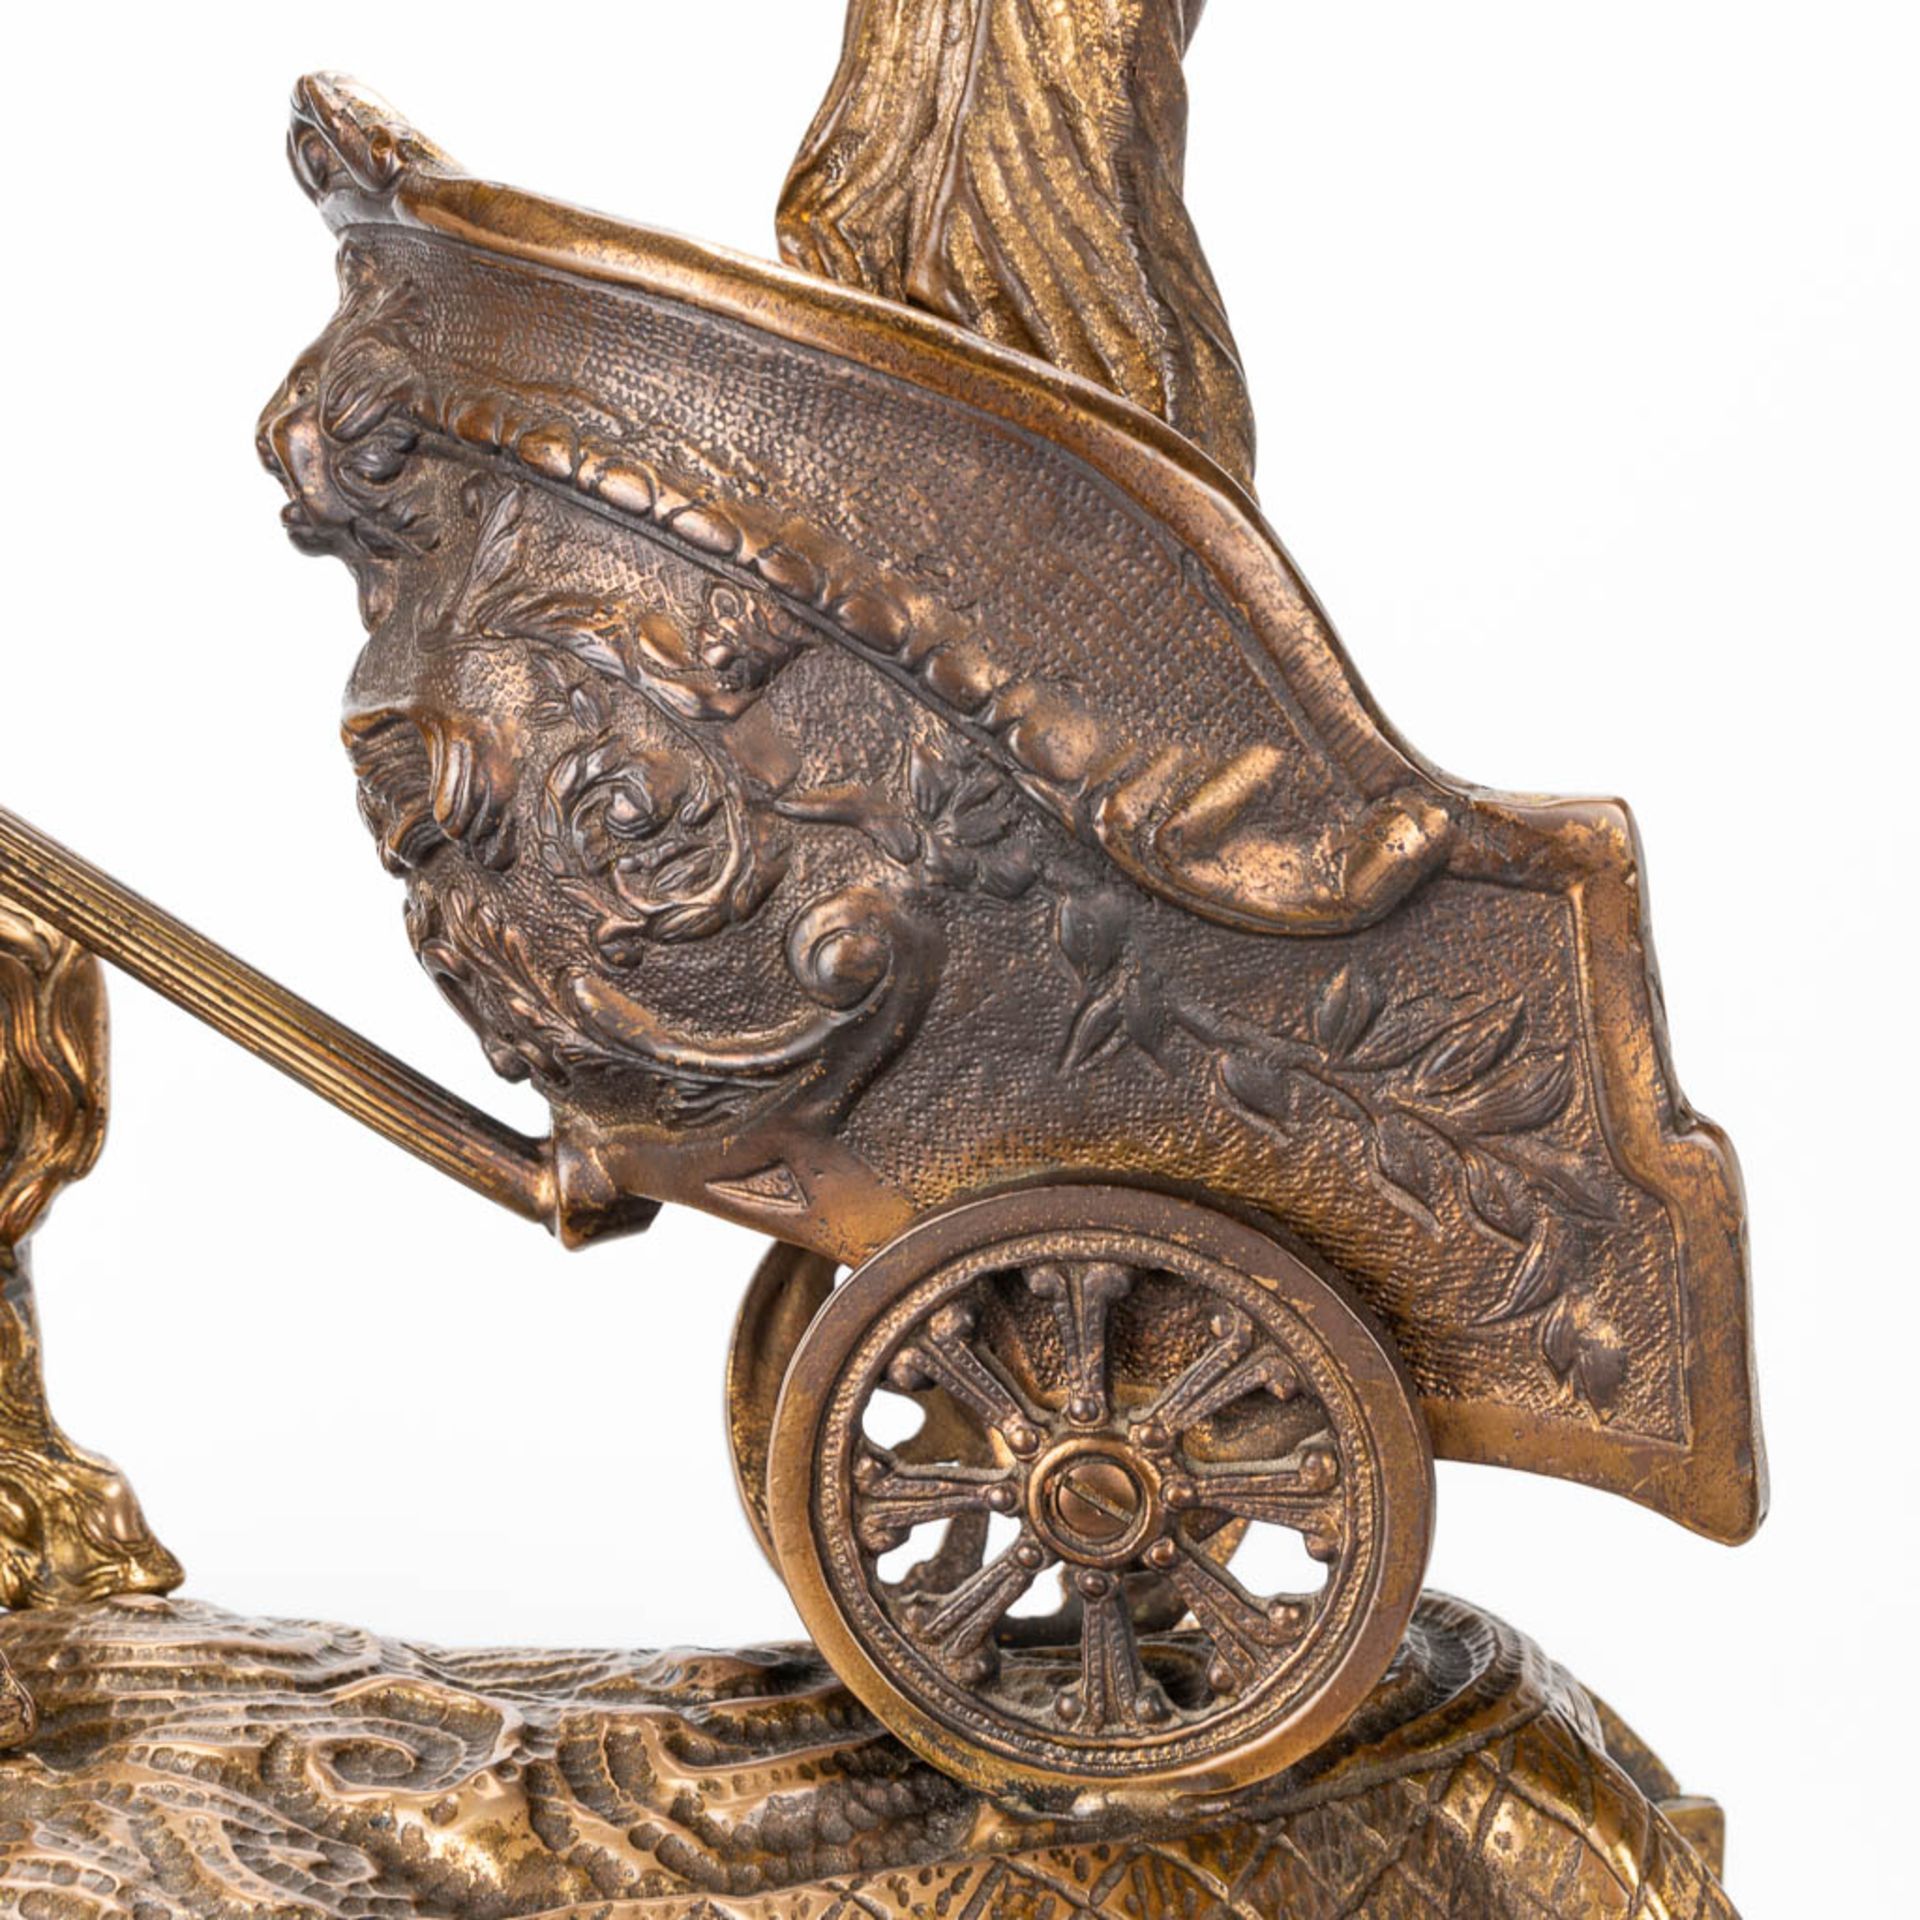 A 3 piece garniture clockset made of bronze, consisting of a clock with battle cart and 2 side piece - Image 15 of 18